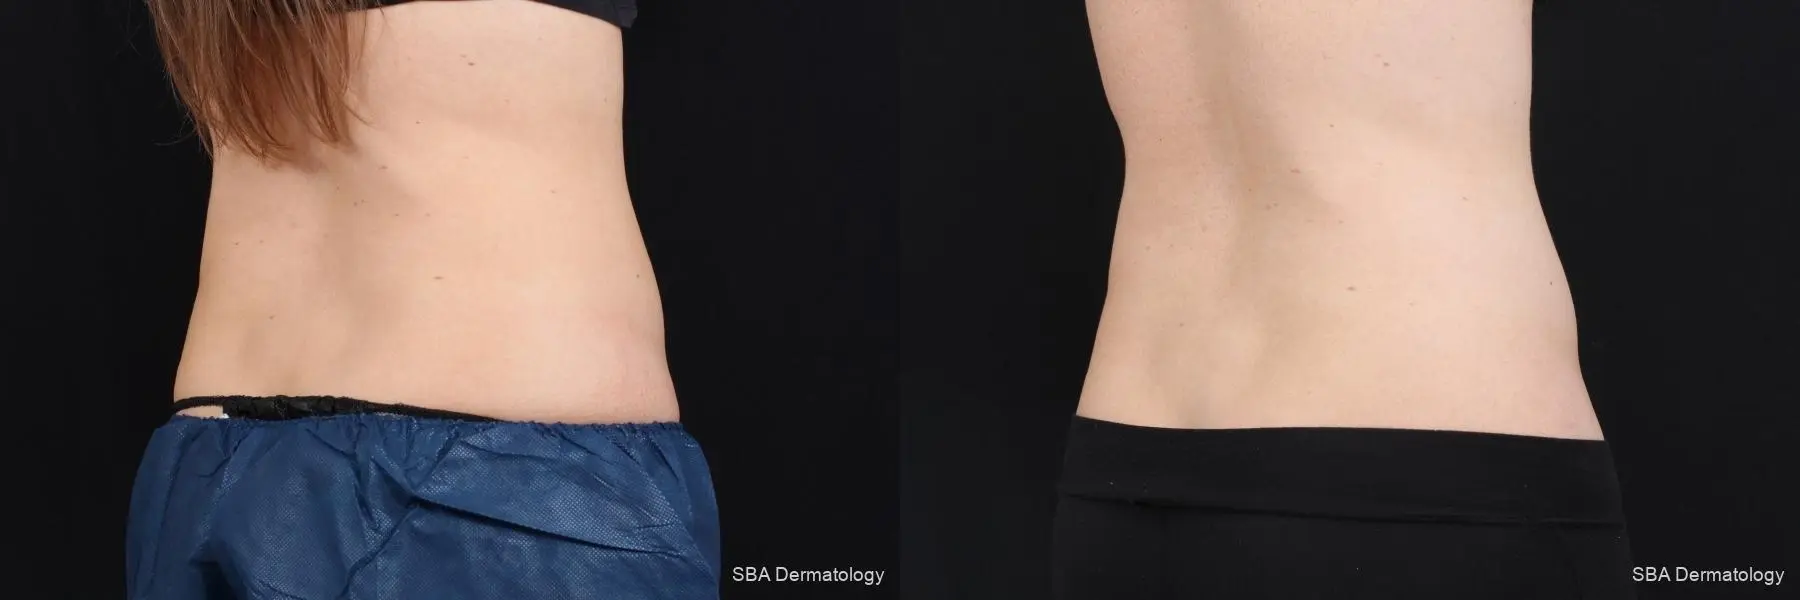 Coolsculpting: Patient 7 - Before and After 6